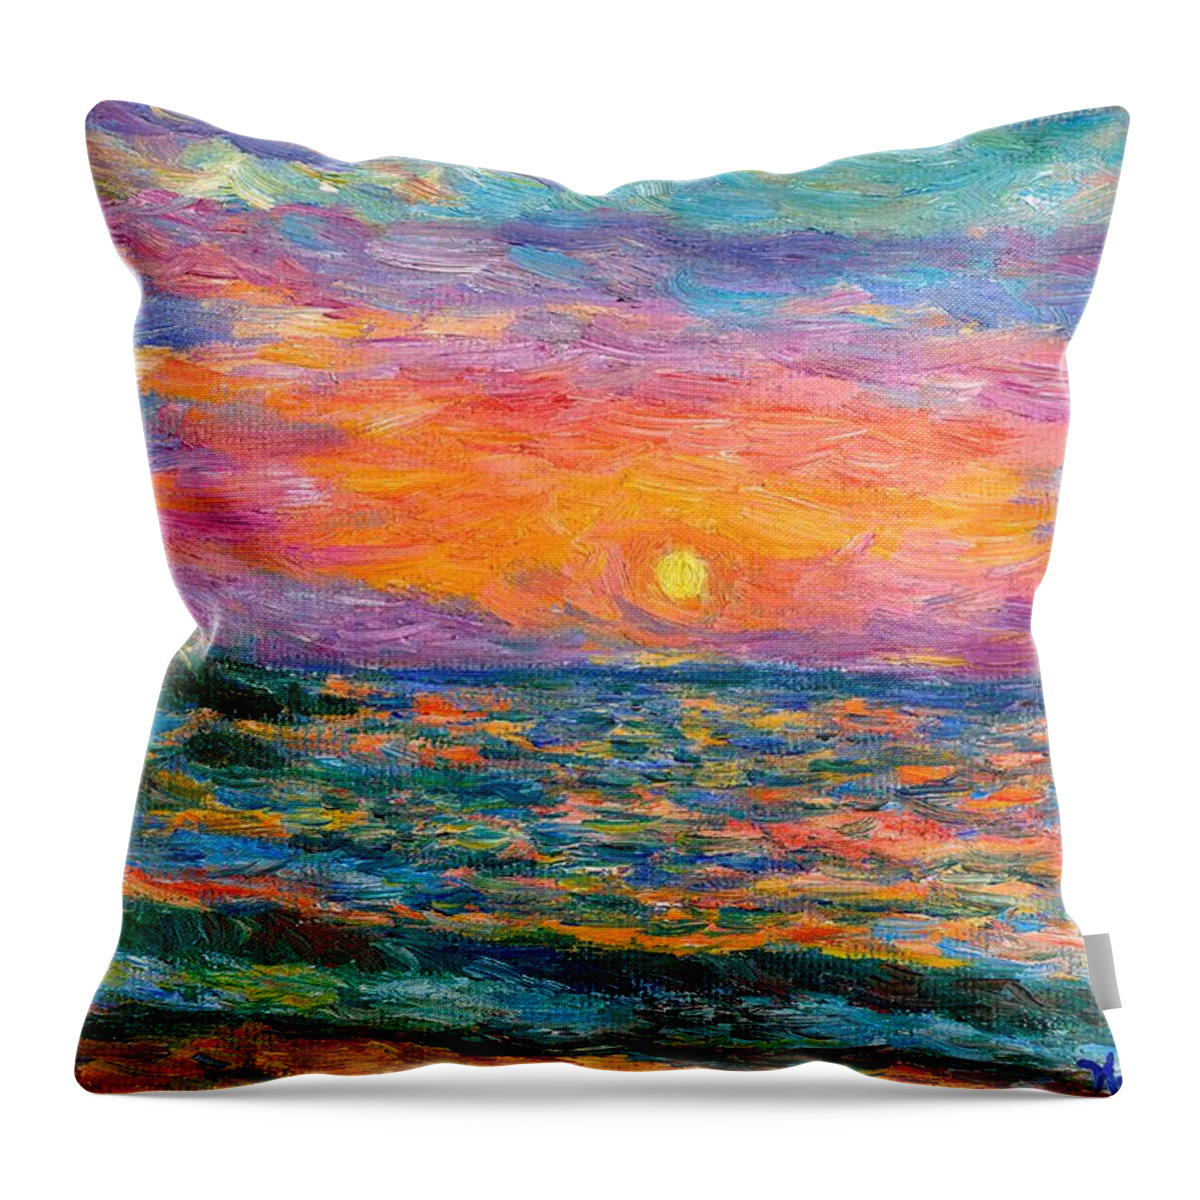 Ocean Throw Pillow featuring the painting Burning Shore by Kendall Kessler